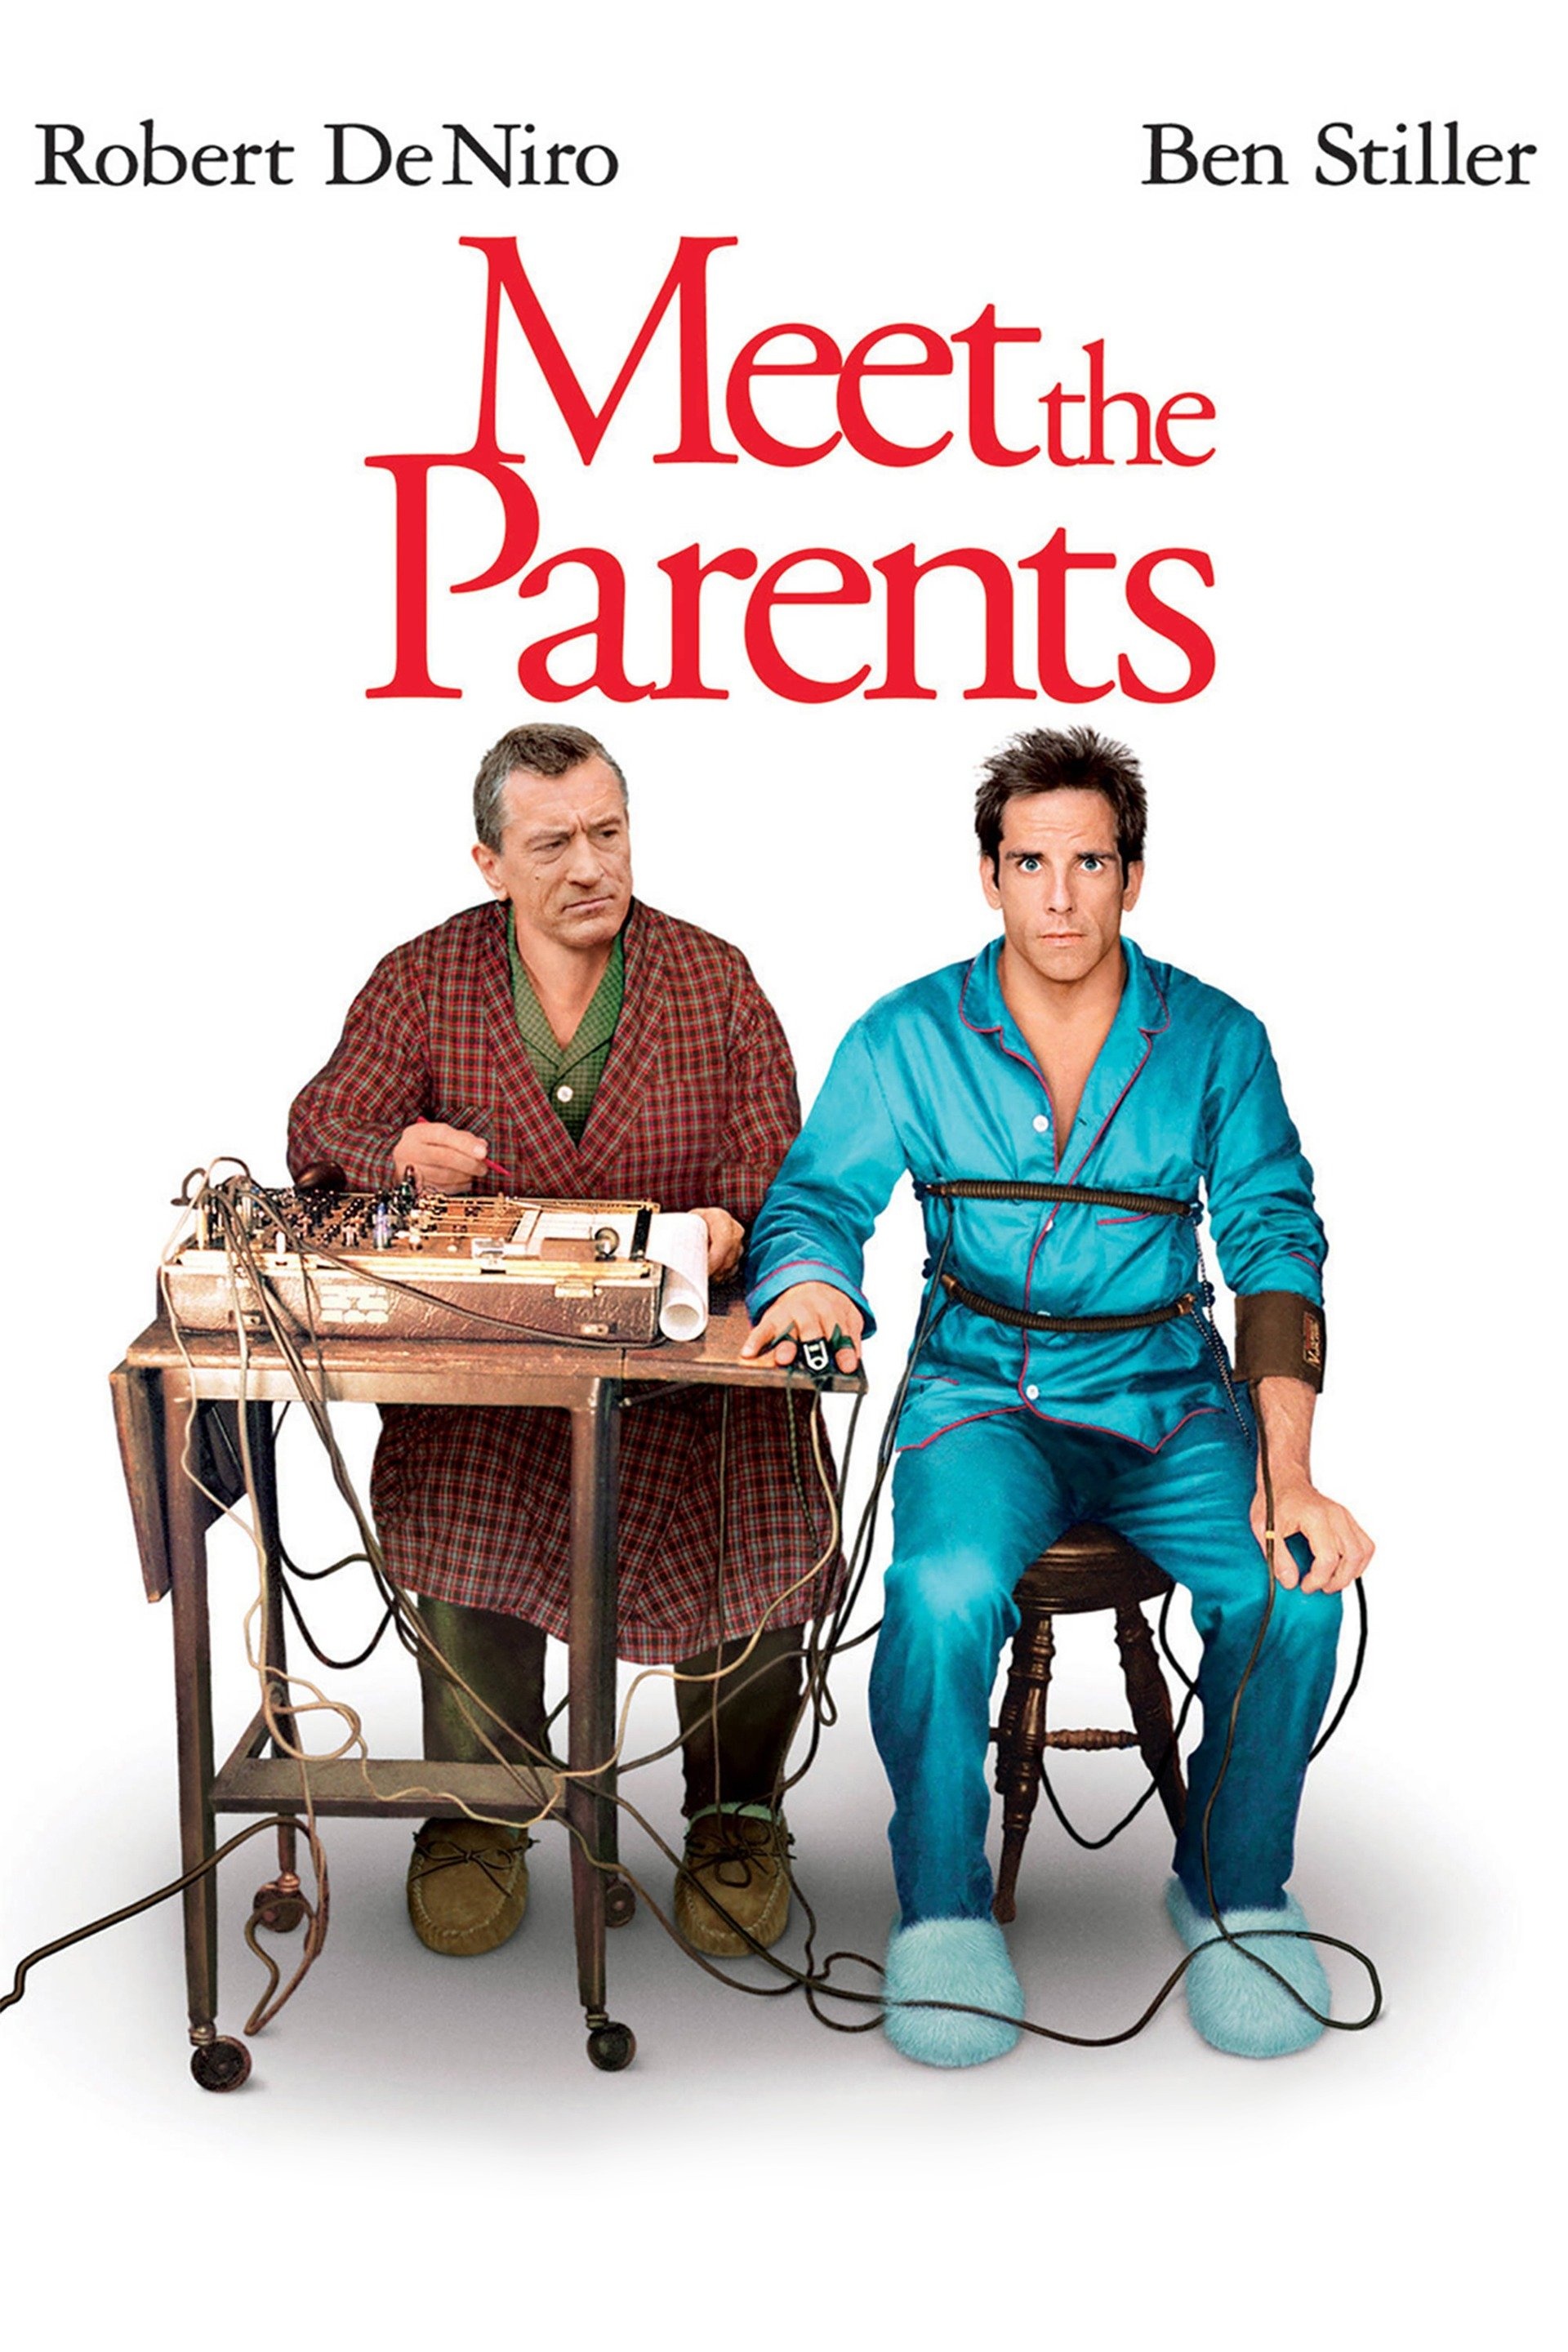 Meet the Parents, Comedy film, Overprotective father, Unforgettable meet-up, 1920x2880 HD Handy